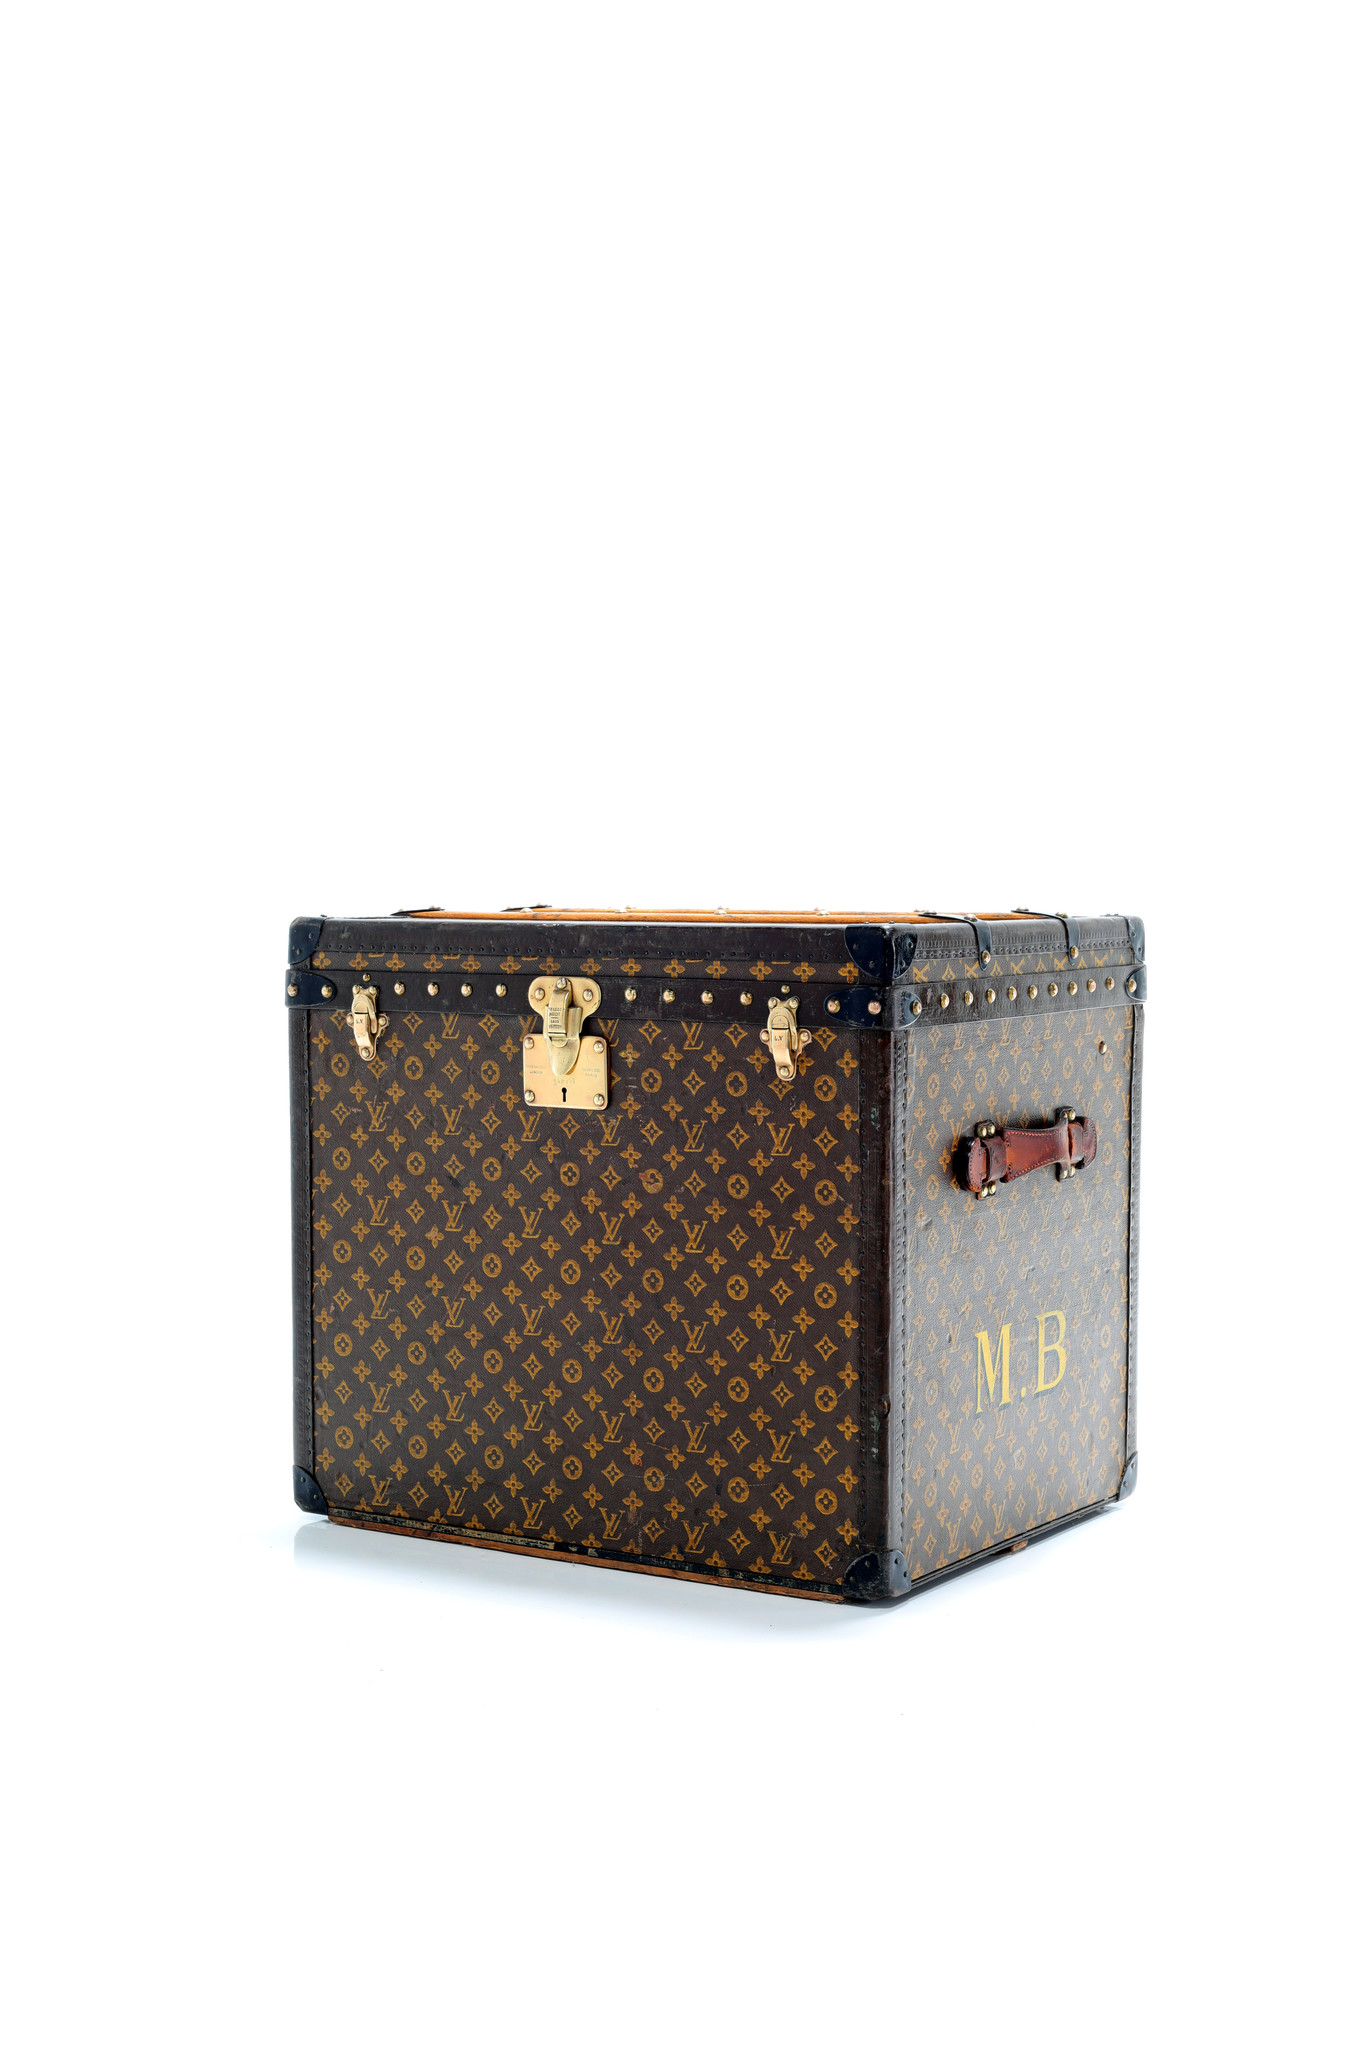 Leather Louis Vuitton wardrobe suitcase, 1920's - THE HOUSE OF WAUW